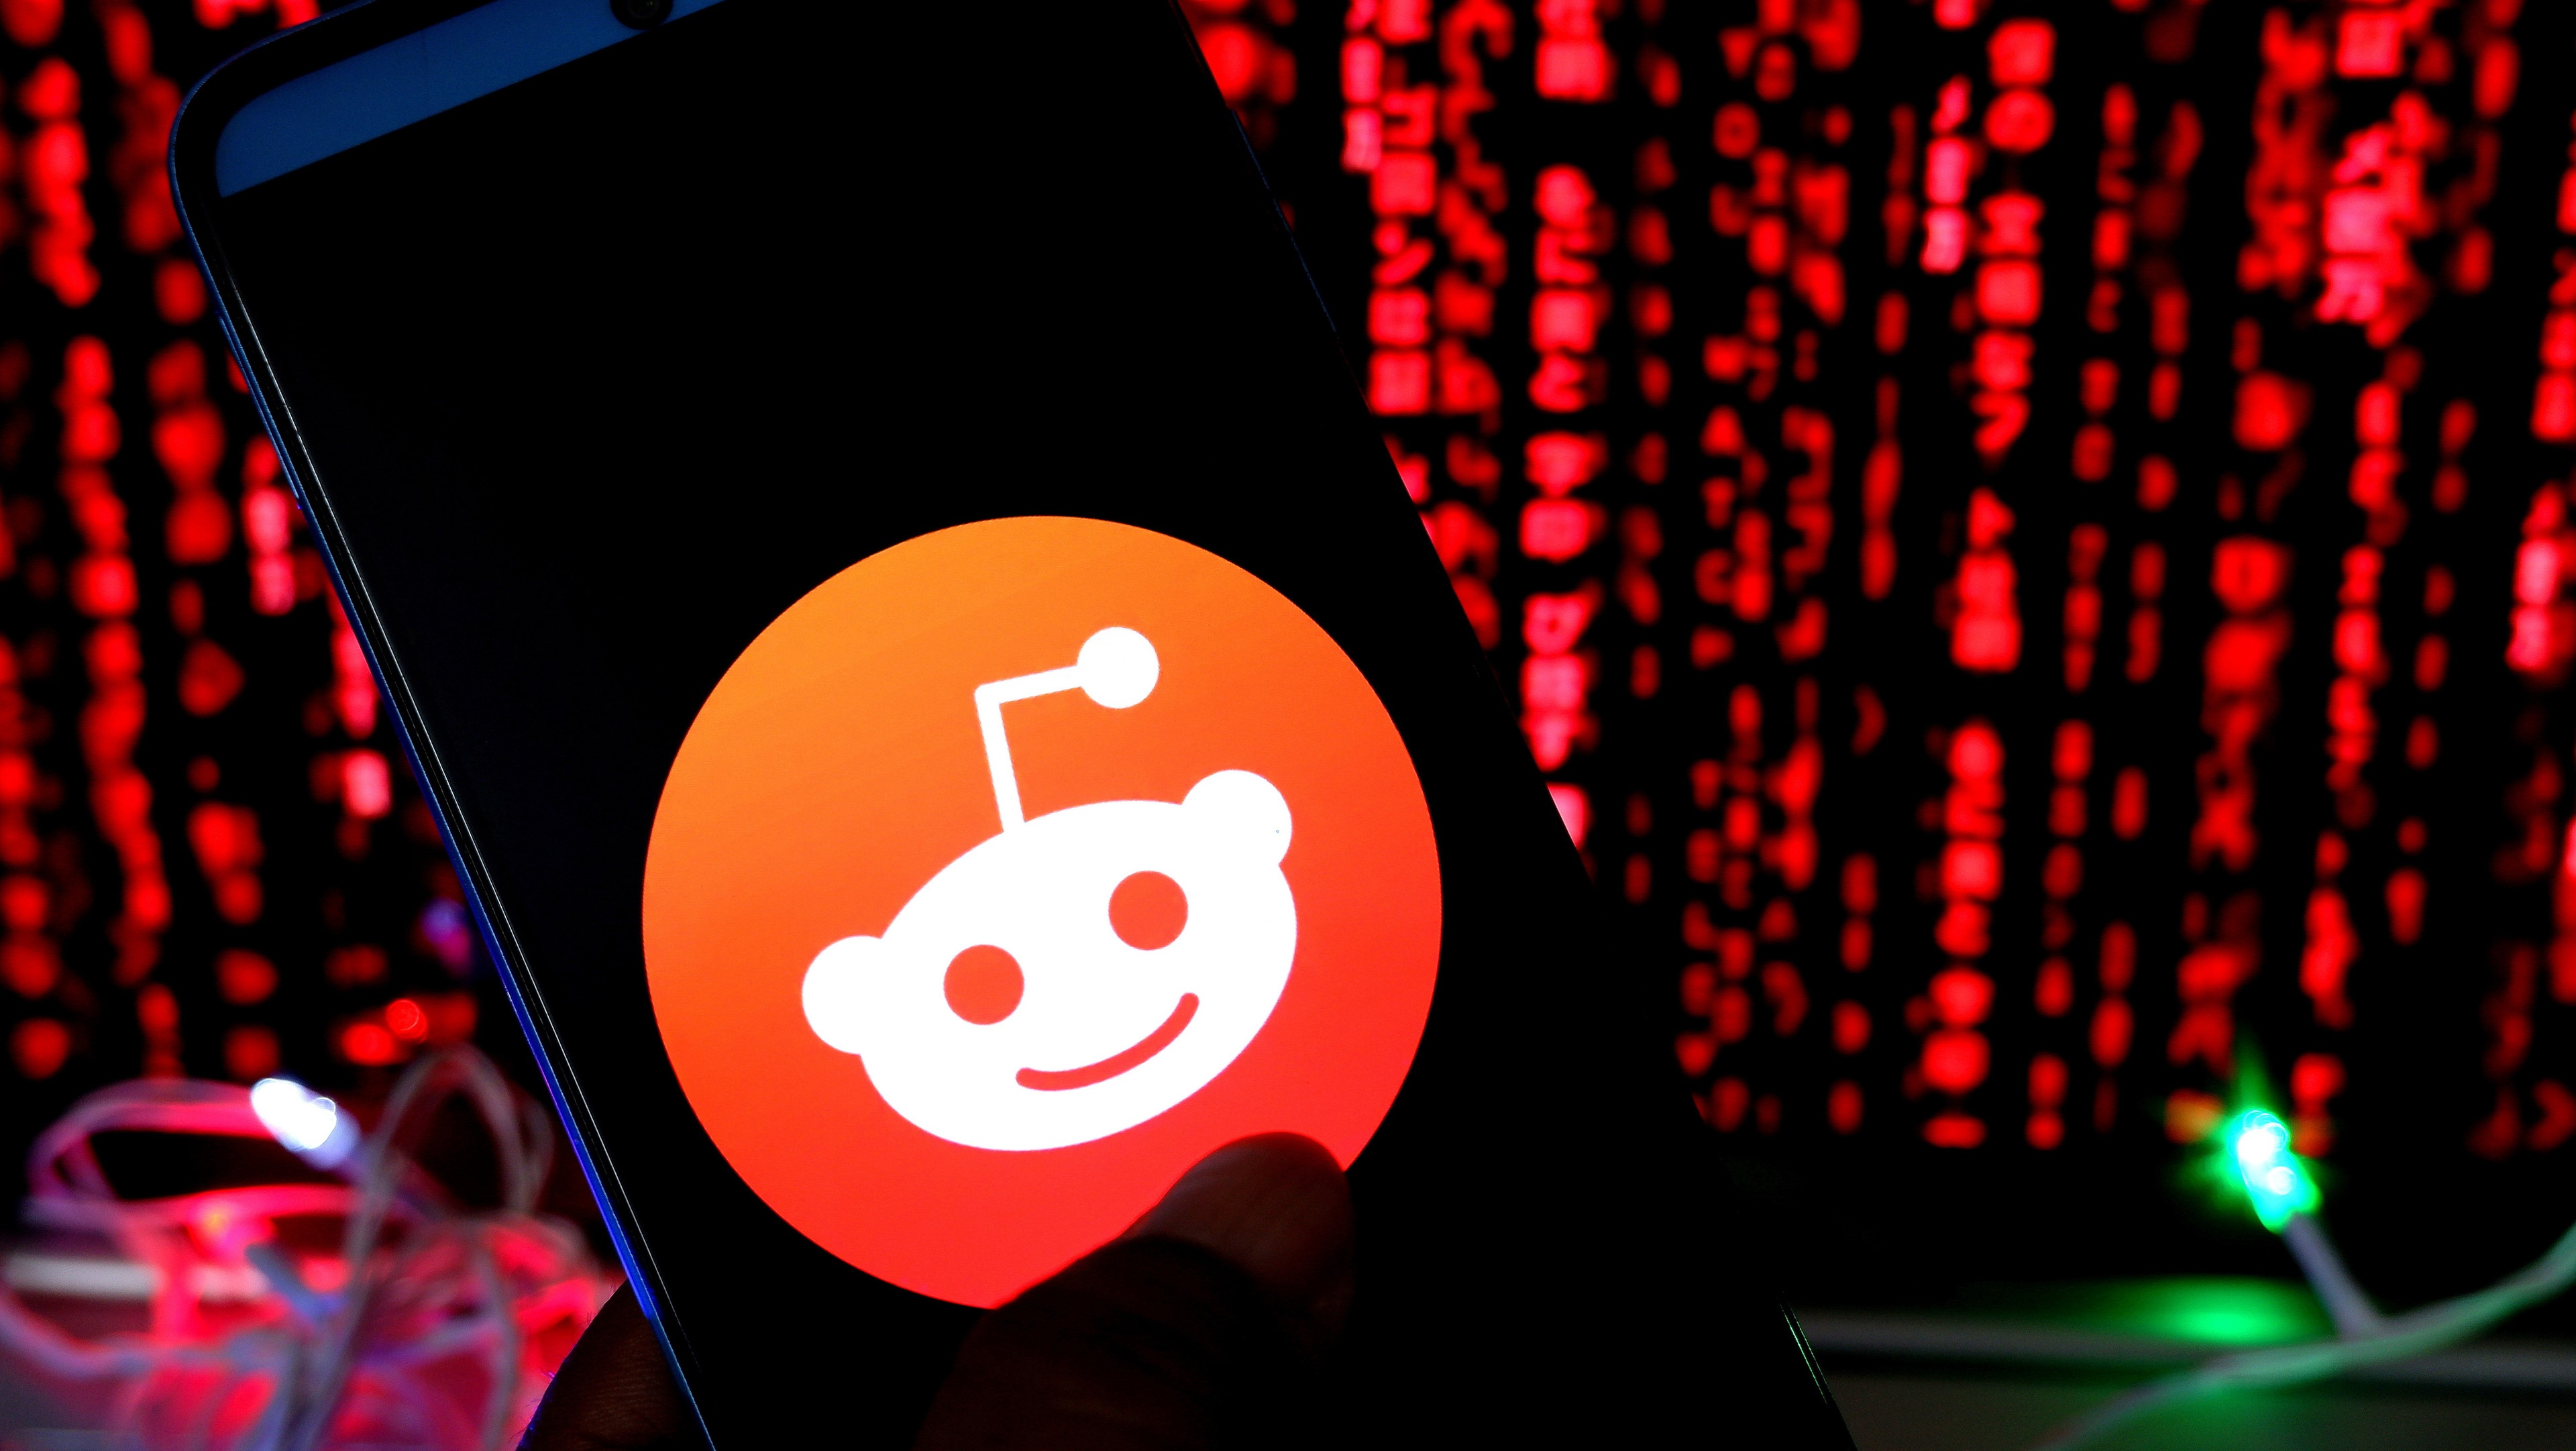 7,178 subreddits and counting have gone dark today in protest of a 3rd-party app pricing calamity PC Gamer